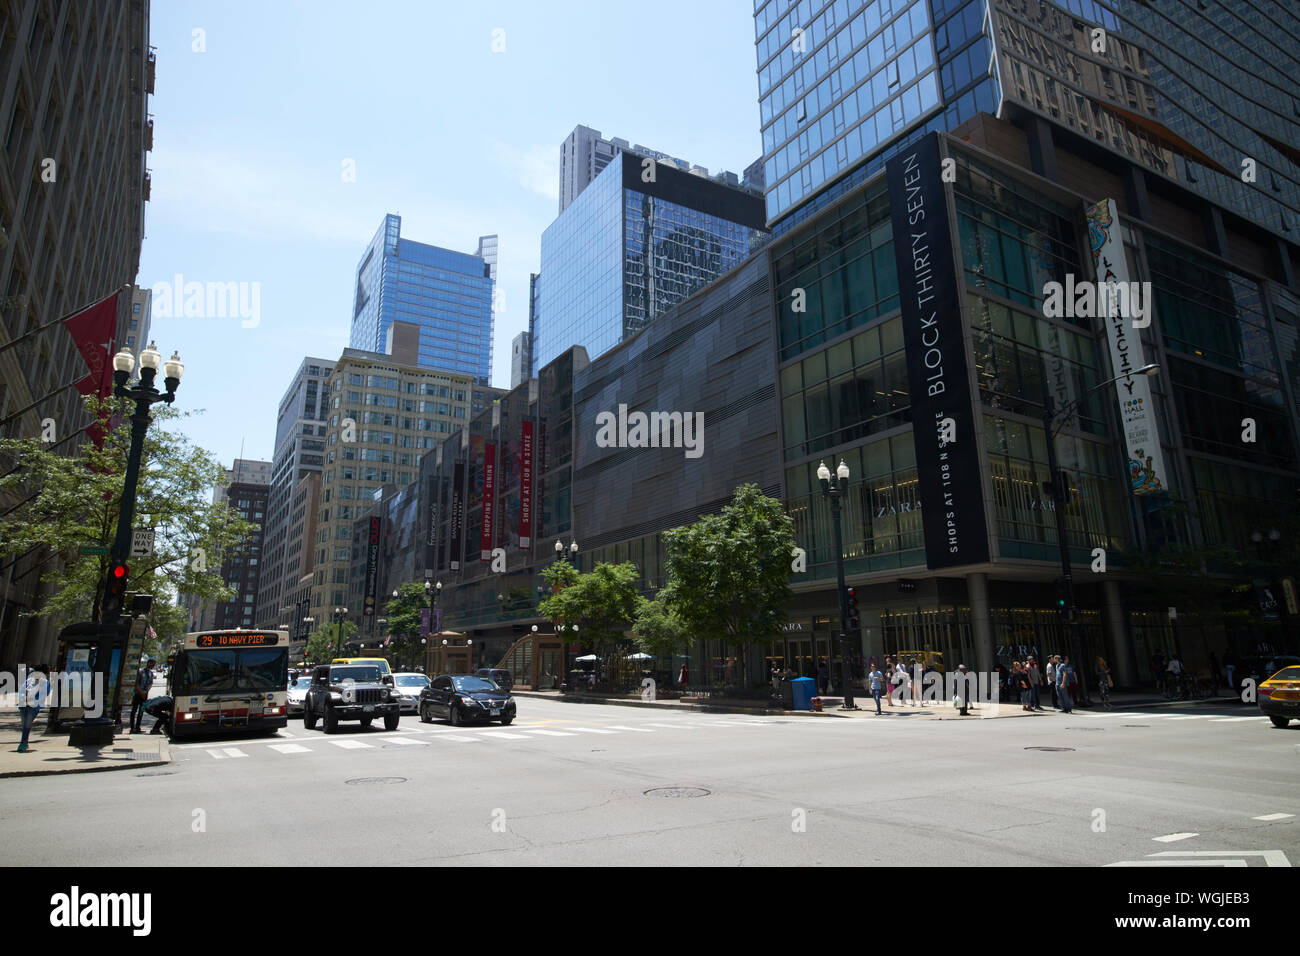 state street shopping area at block 37 chicago illinois united states ...